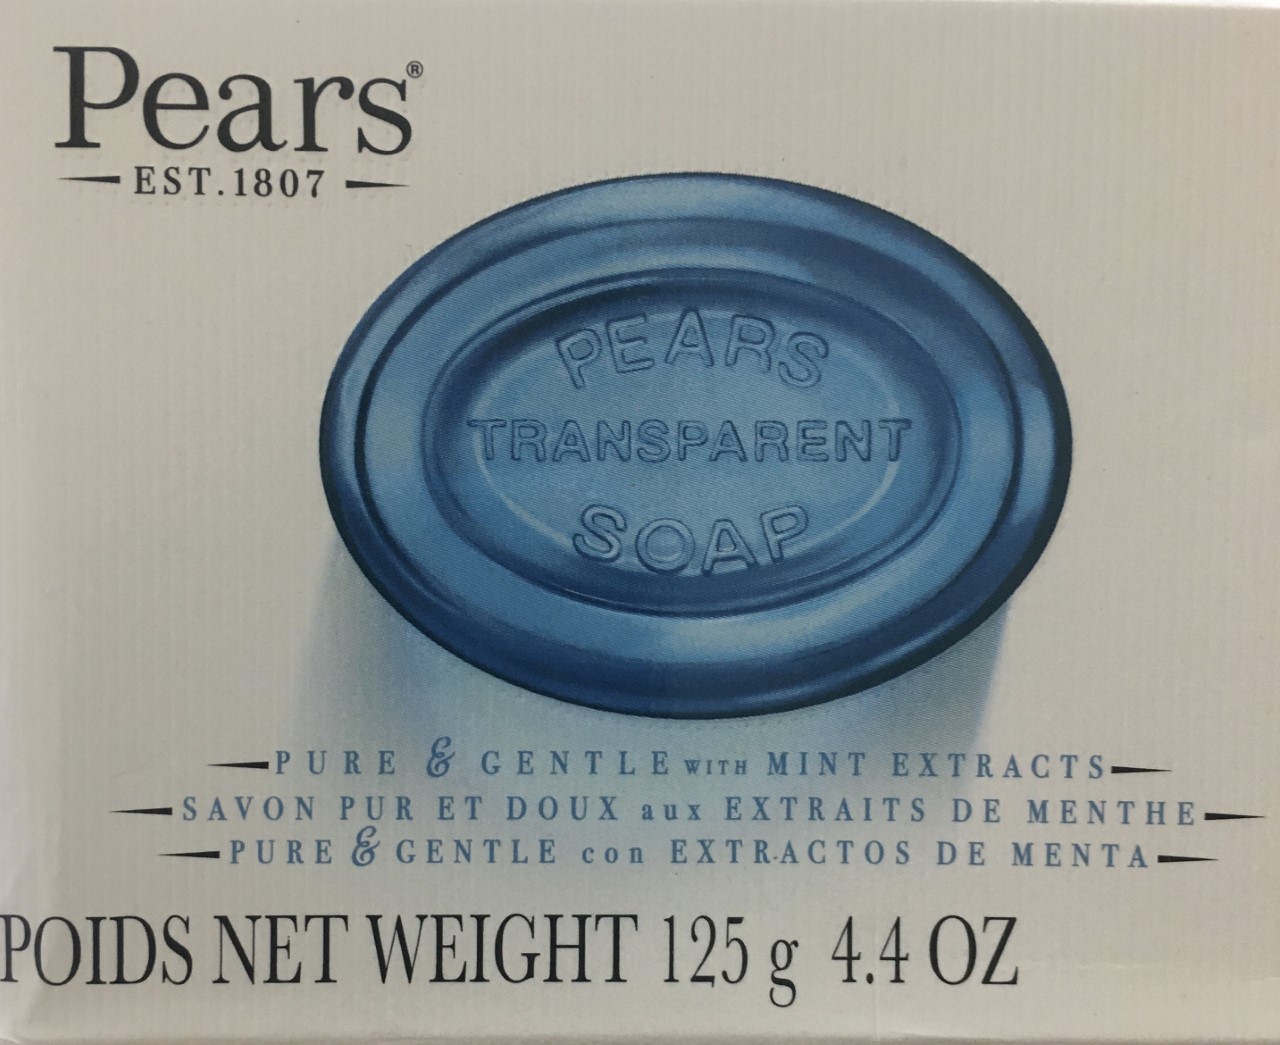 Pears Transparent Soap with Mint Extracts Extracts 125 grm